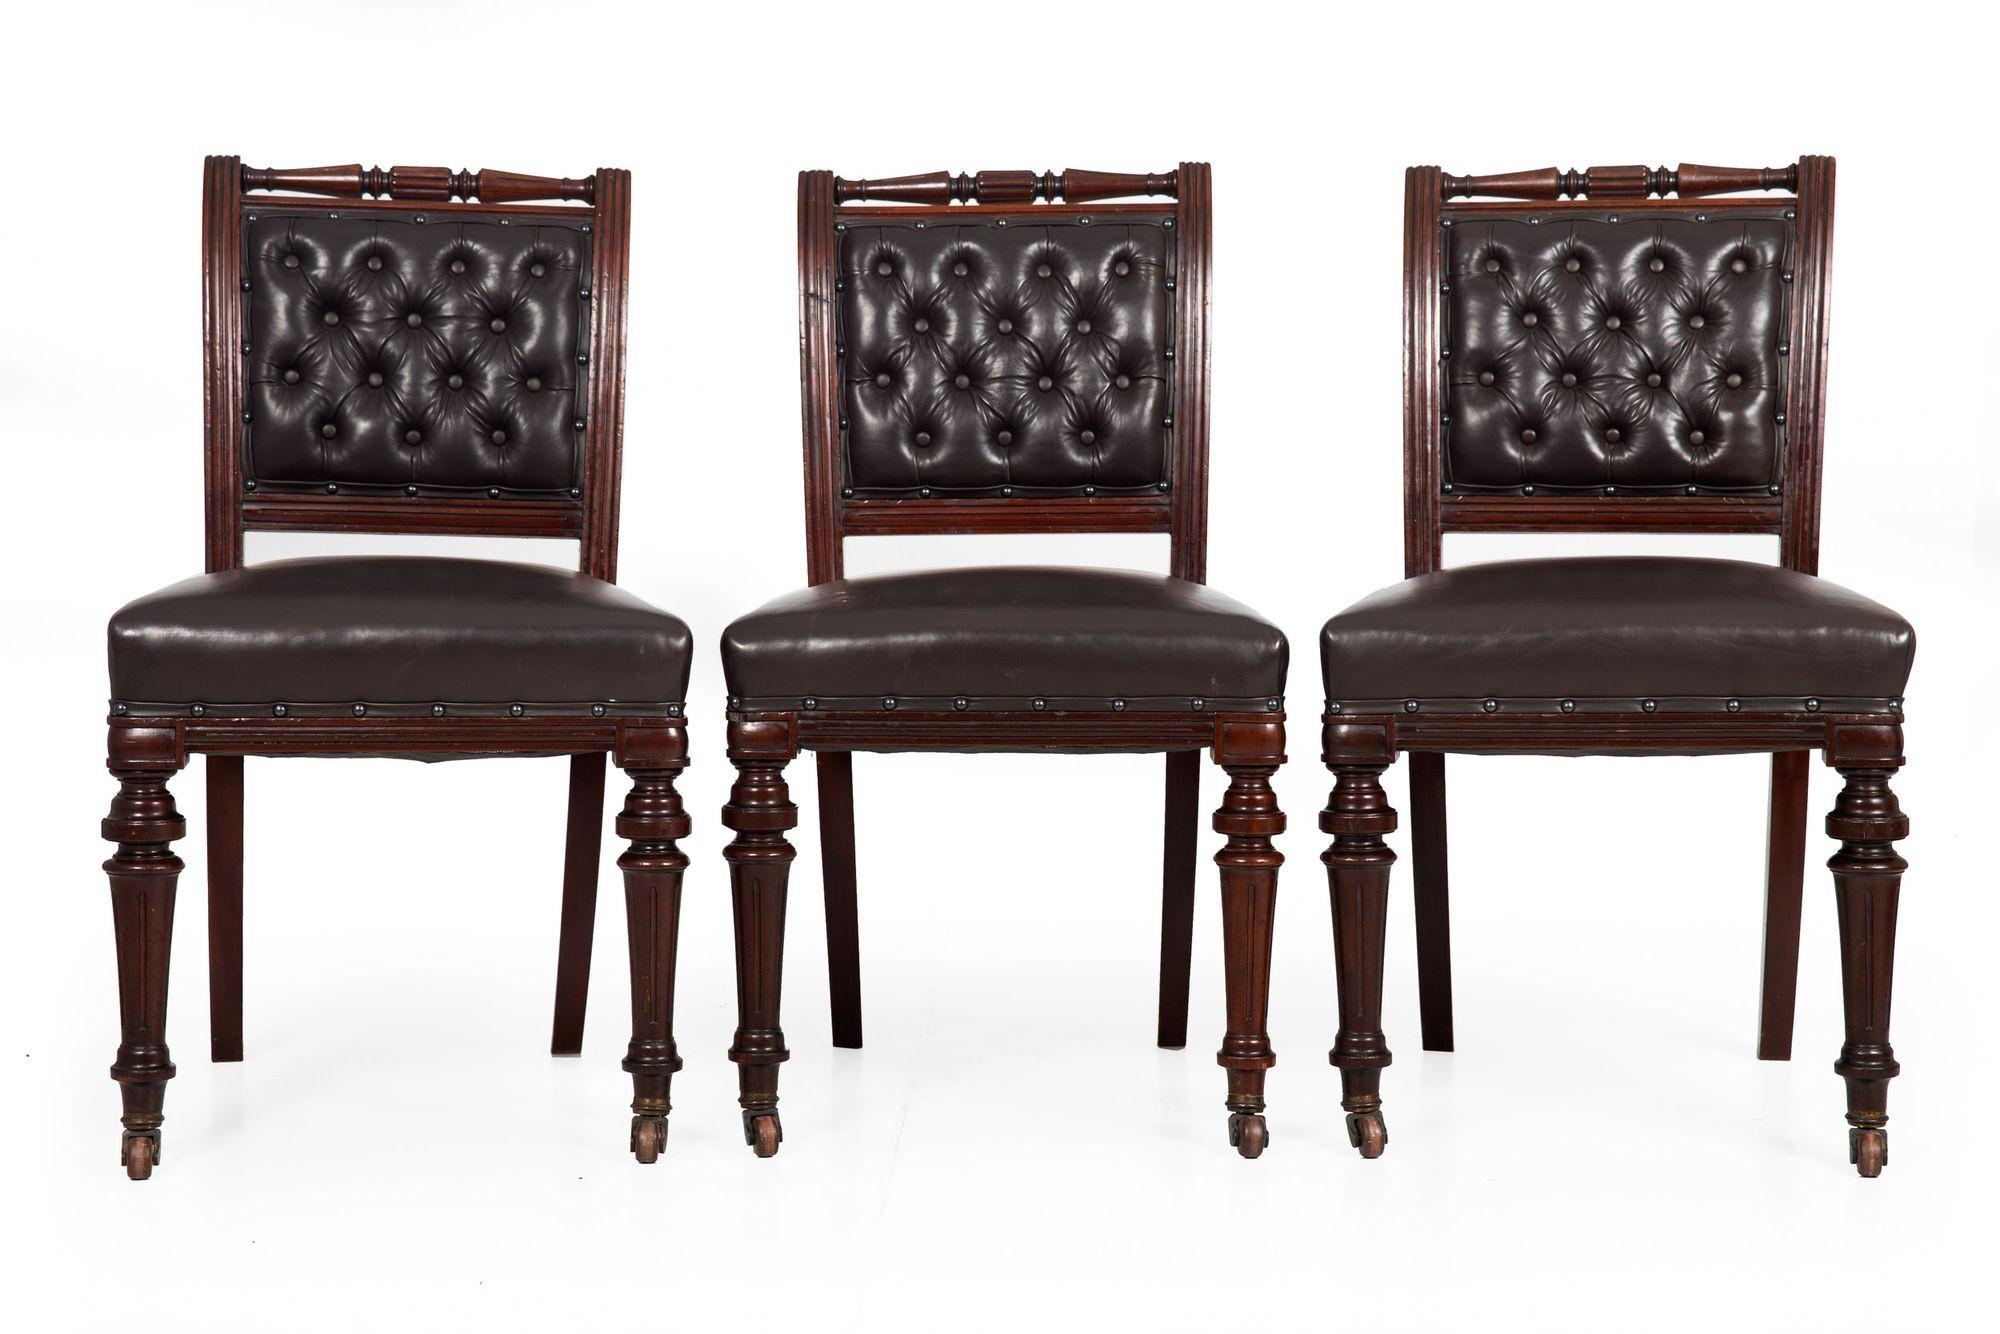 Set of 6 English Antique Mahogany and Leather Dining Chairs, 19th Century 2